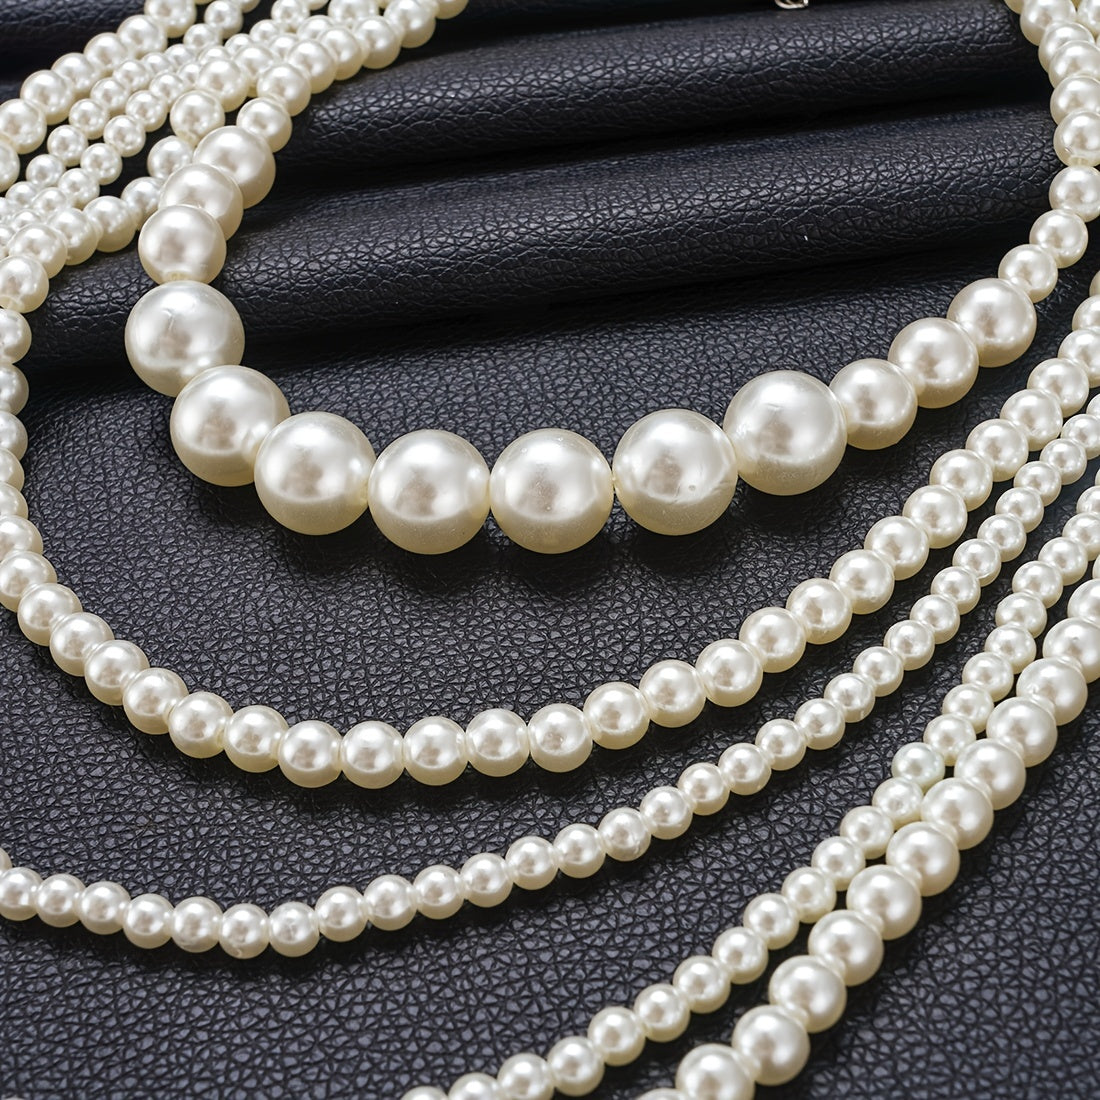 1pcs Multi-Layer Elegant Imitation Pearl Necklace for Women - Perfect for Cheongsam and Chinese New Year Outfits